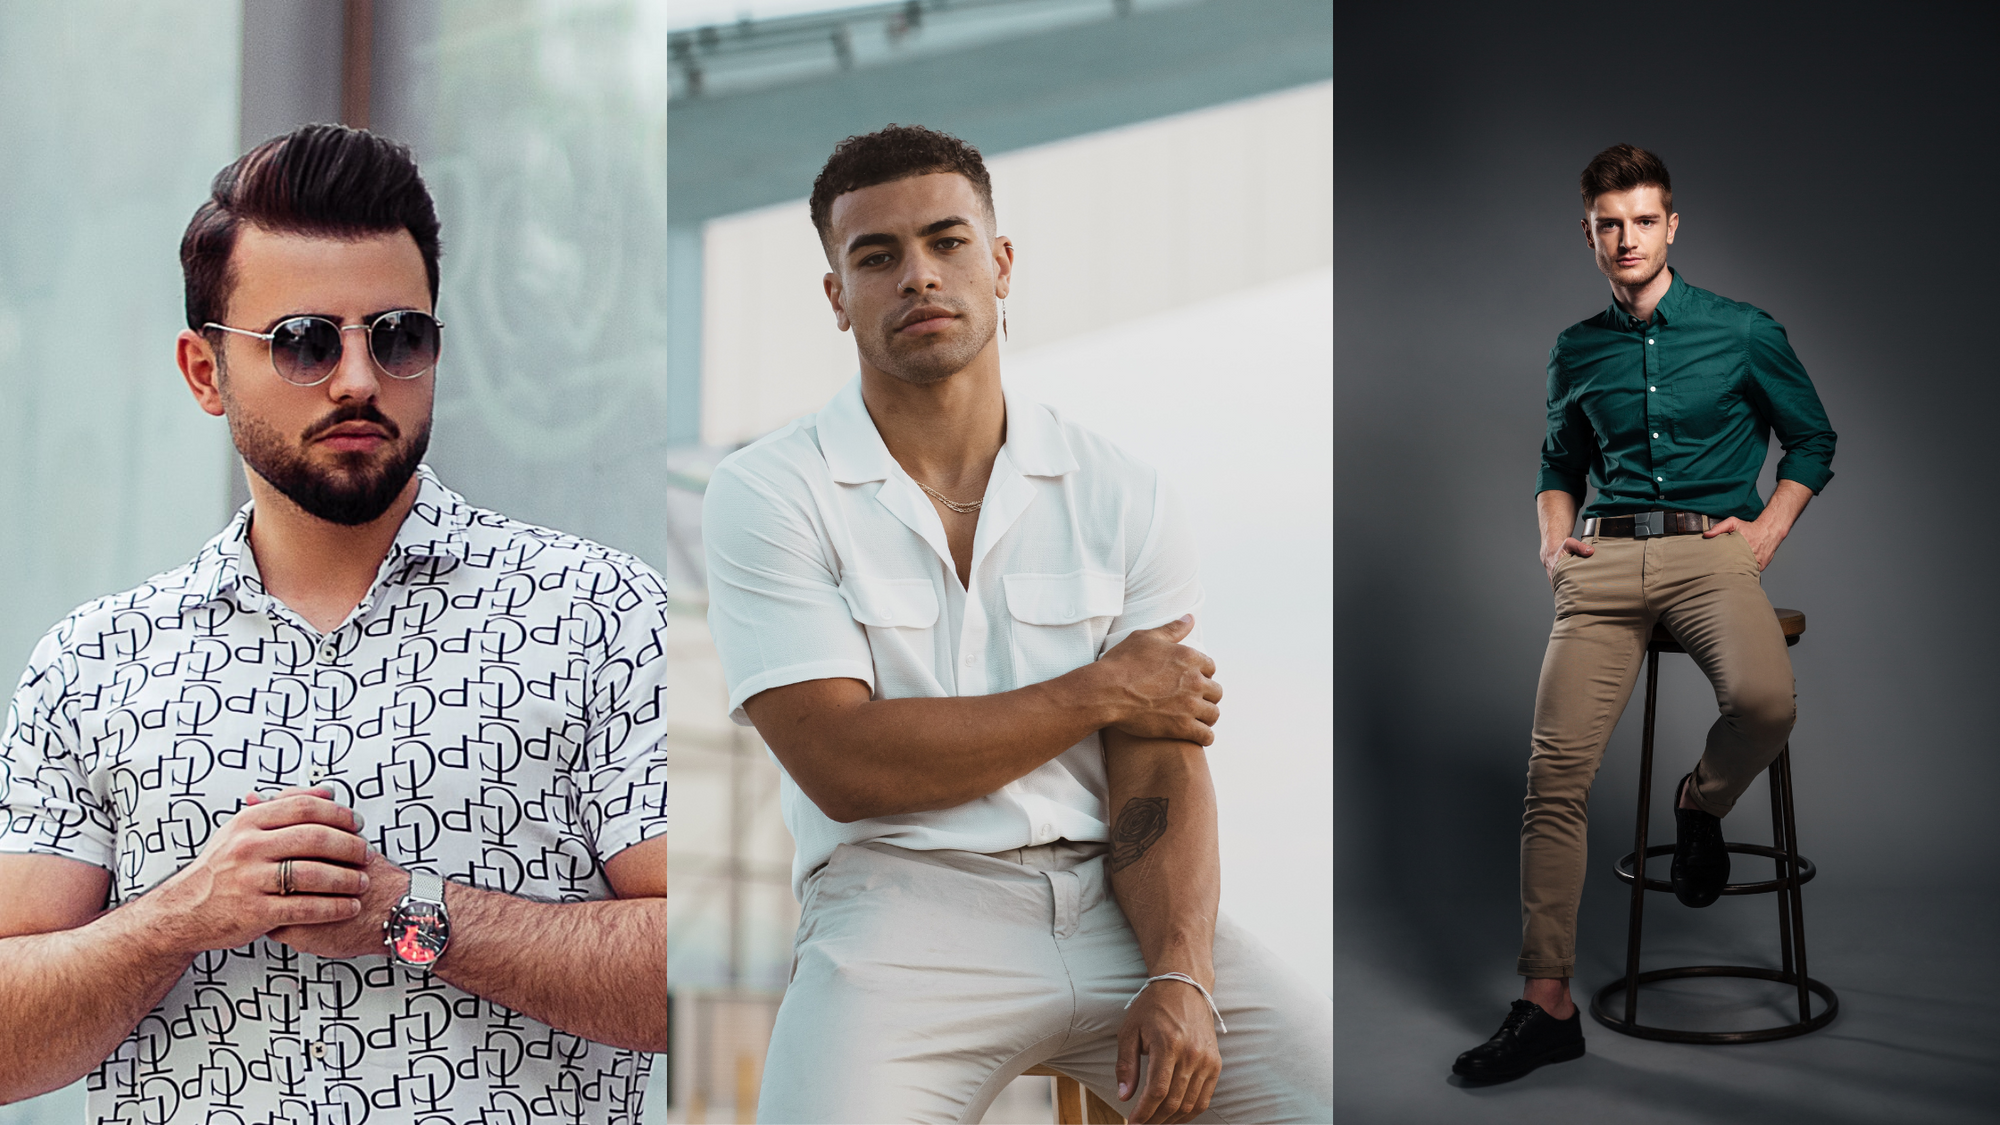 Cool summer shirts ideas for men to beat the heat